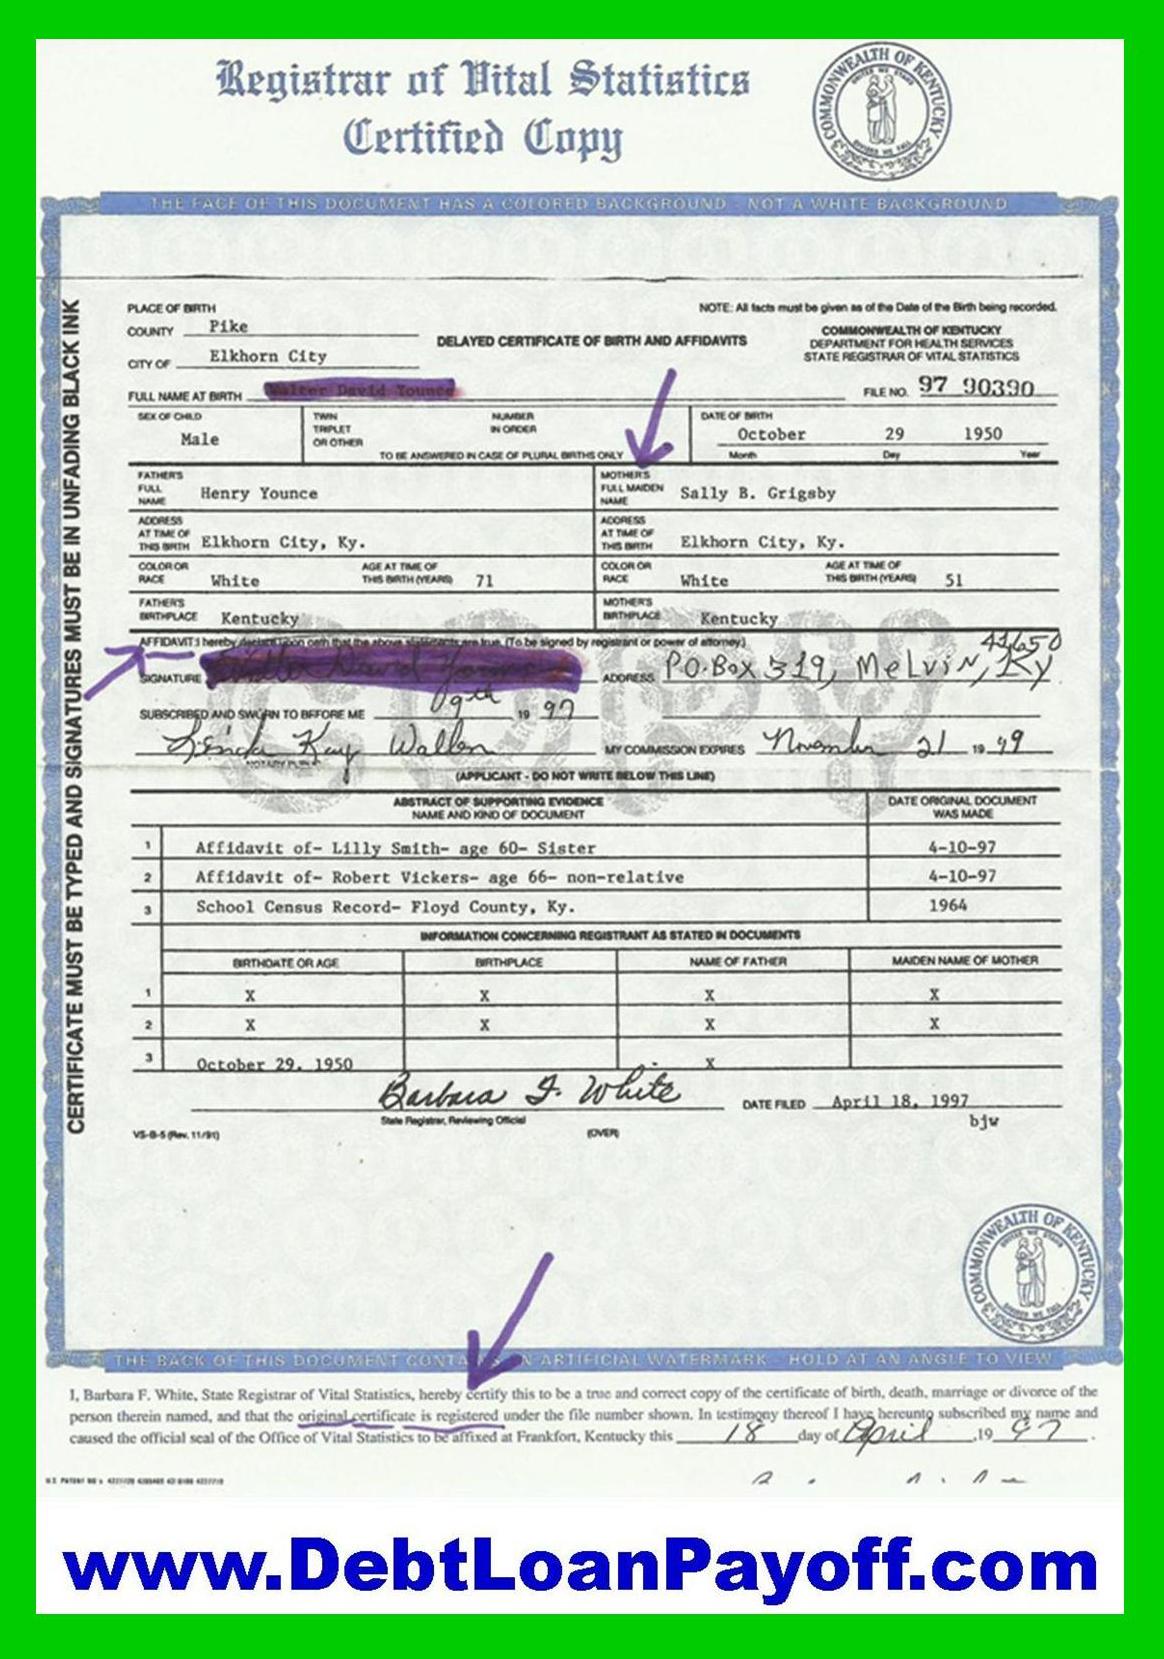 How do you fill out a birth certificate request form?